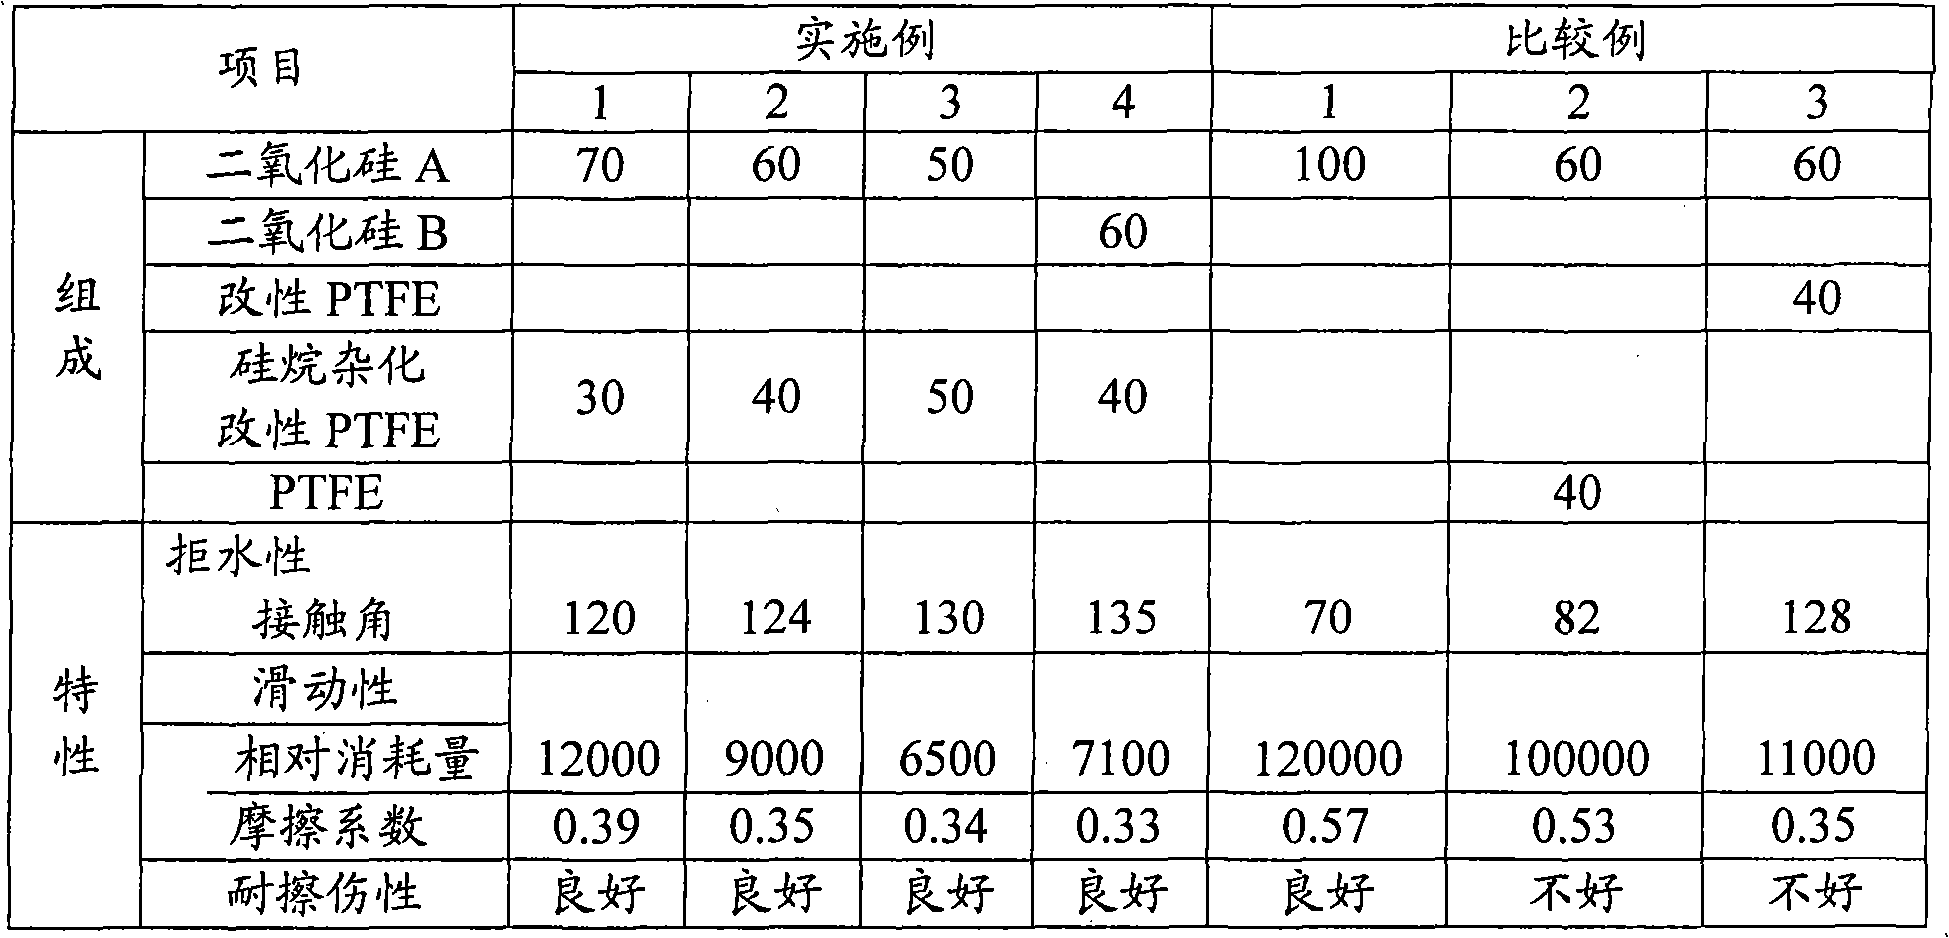 High-water-repellency and high-slidability coating member, fabrication method for same, and high-water-repellency and high-slidability product using same